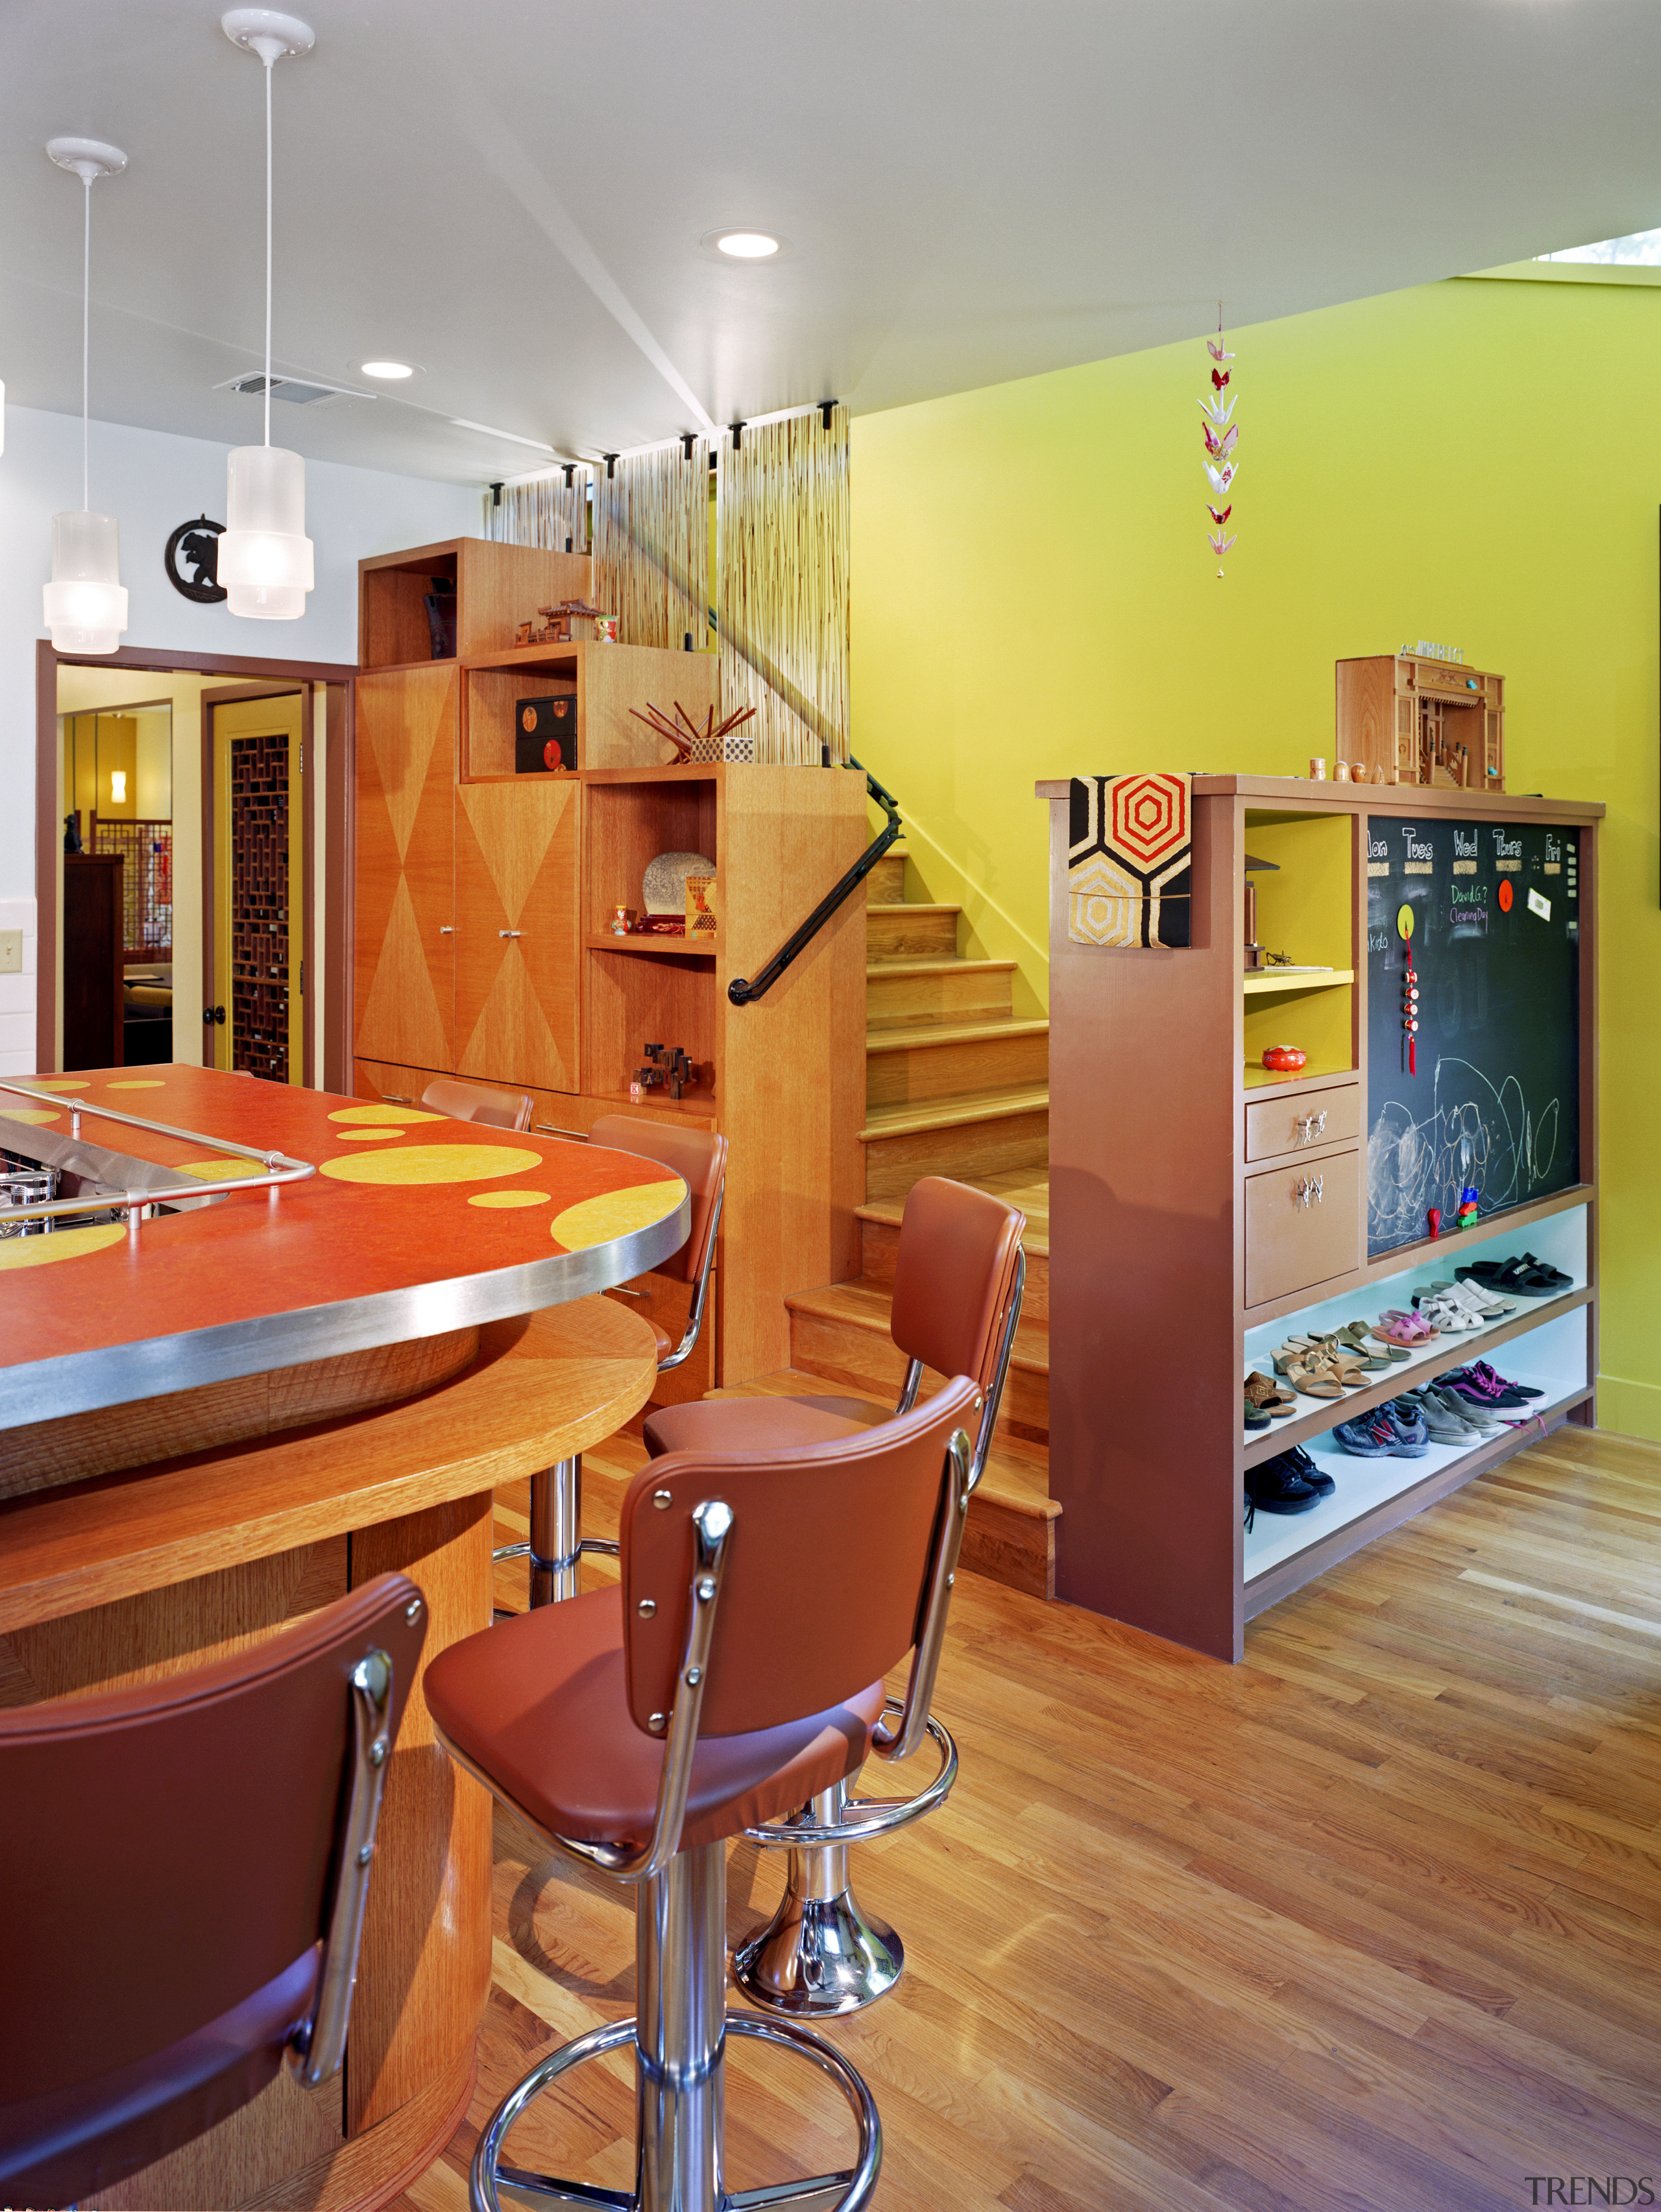 view of kitchen showing stairway leading to next architecture, ceiling, floor, flooring, home, interior design, kitchen, living room, loft, orange, real estate, room, table, wall, red, gray